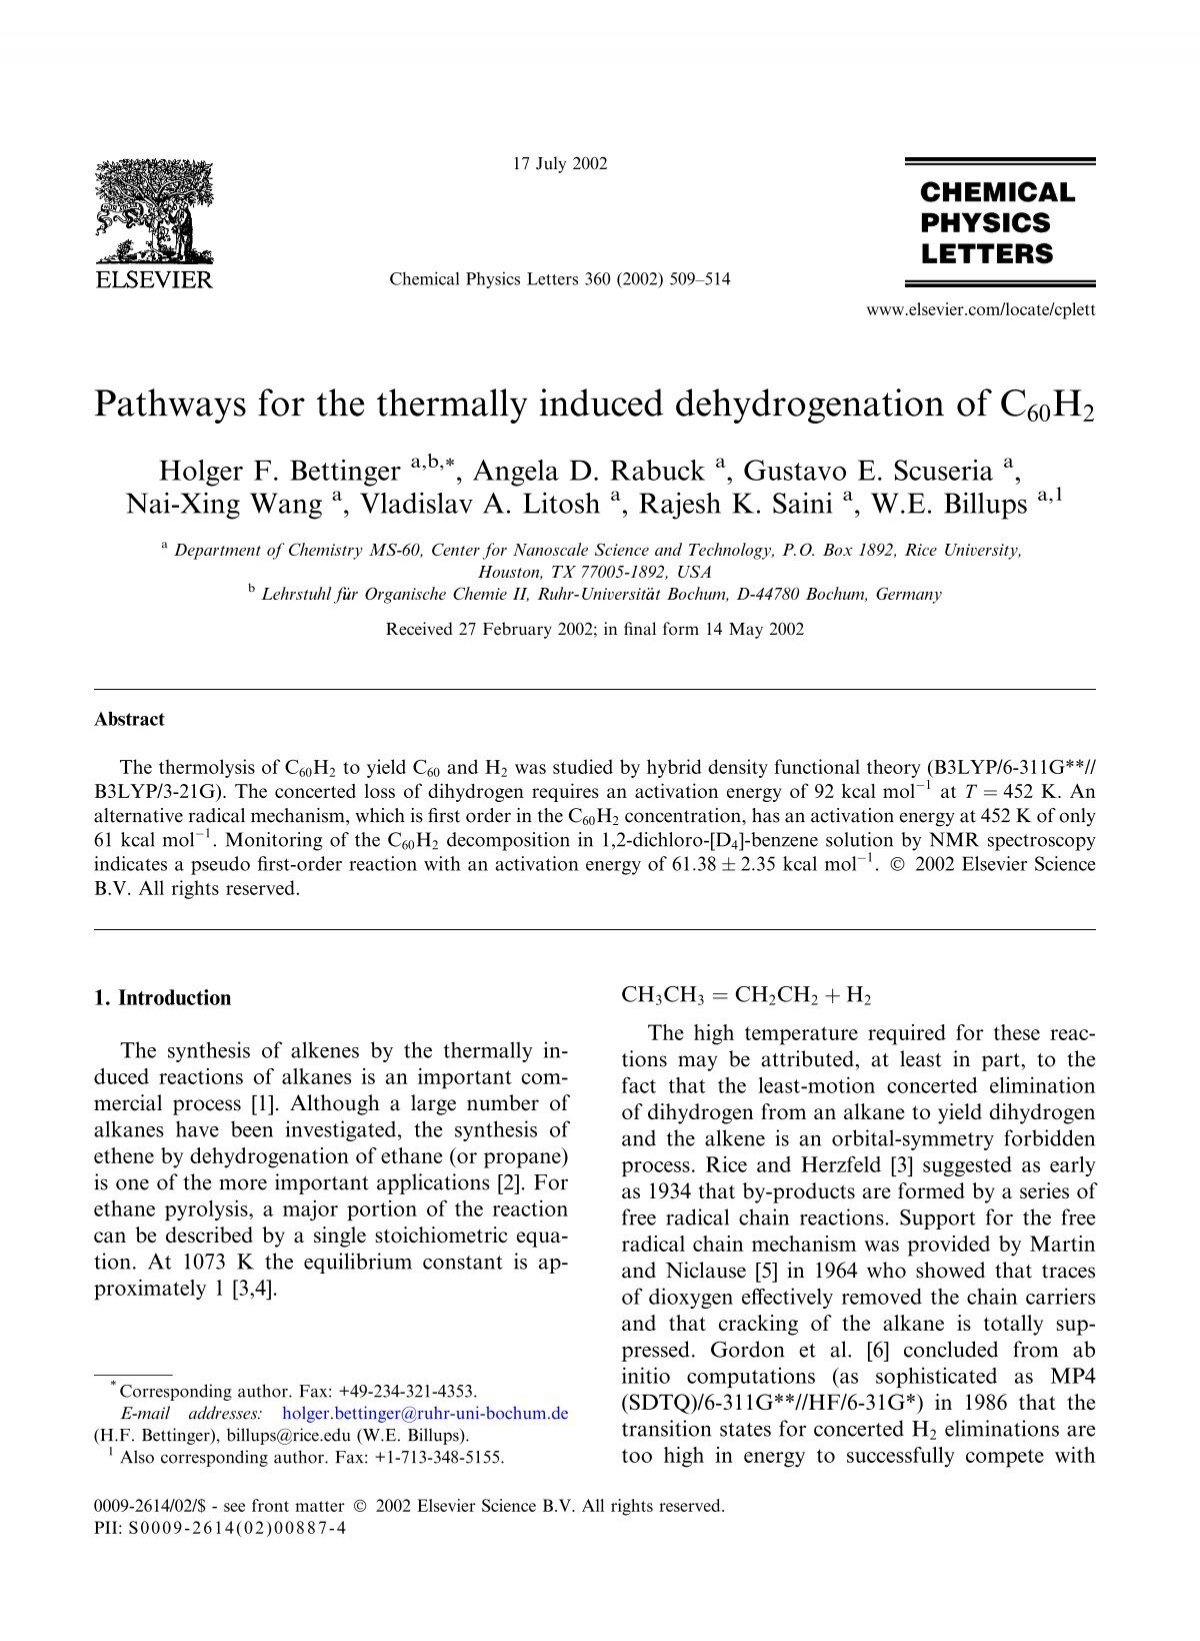 Pathways For The Thermally Induced Dehydrogenation Of C60h2